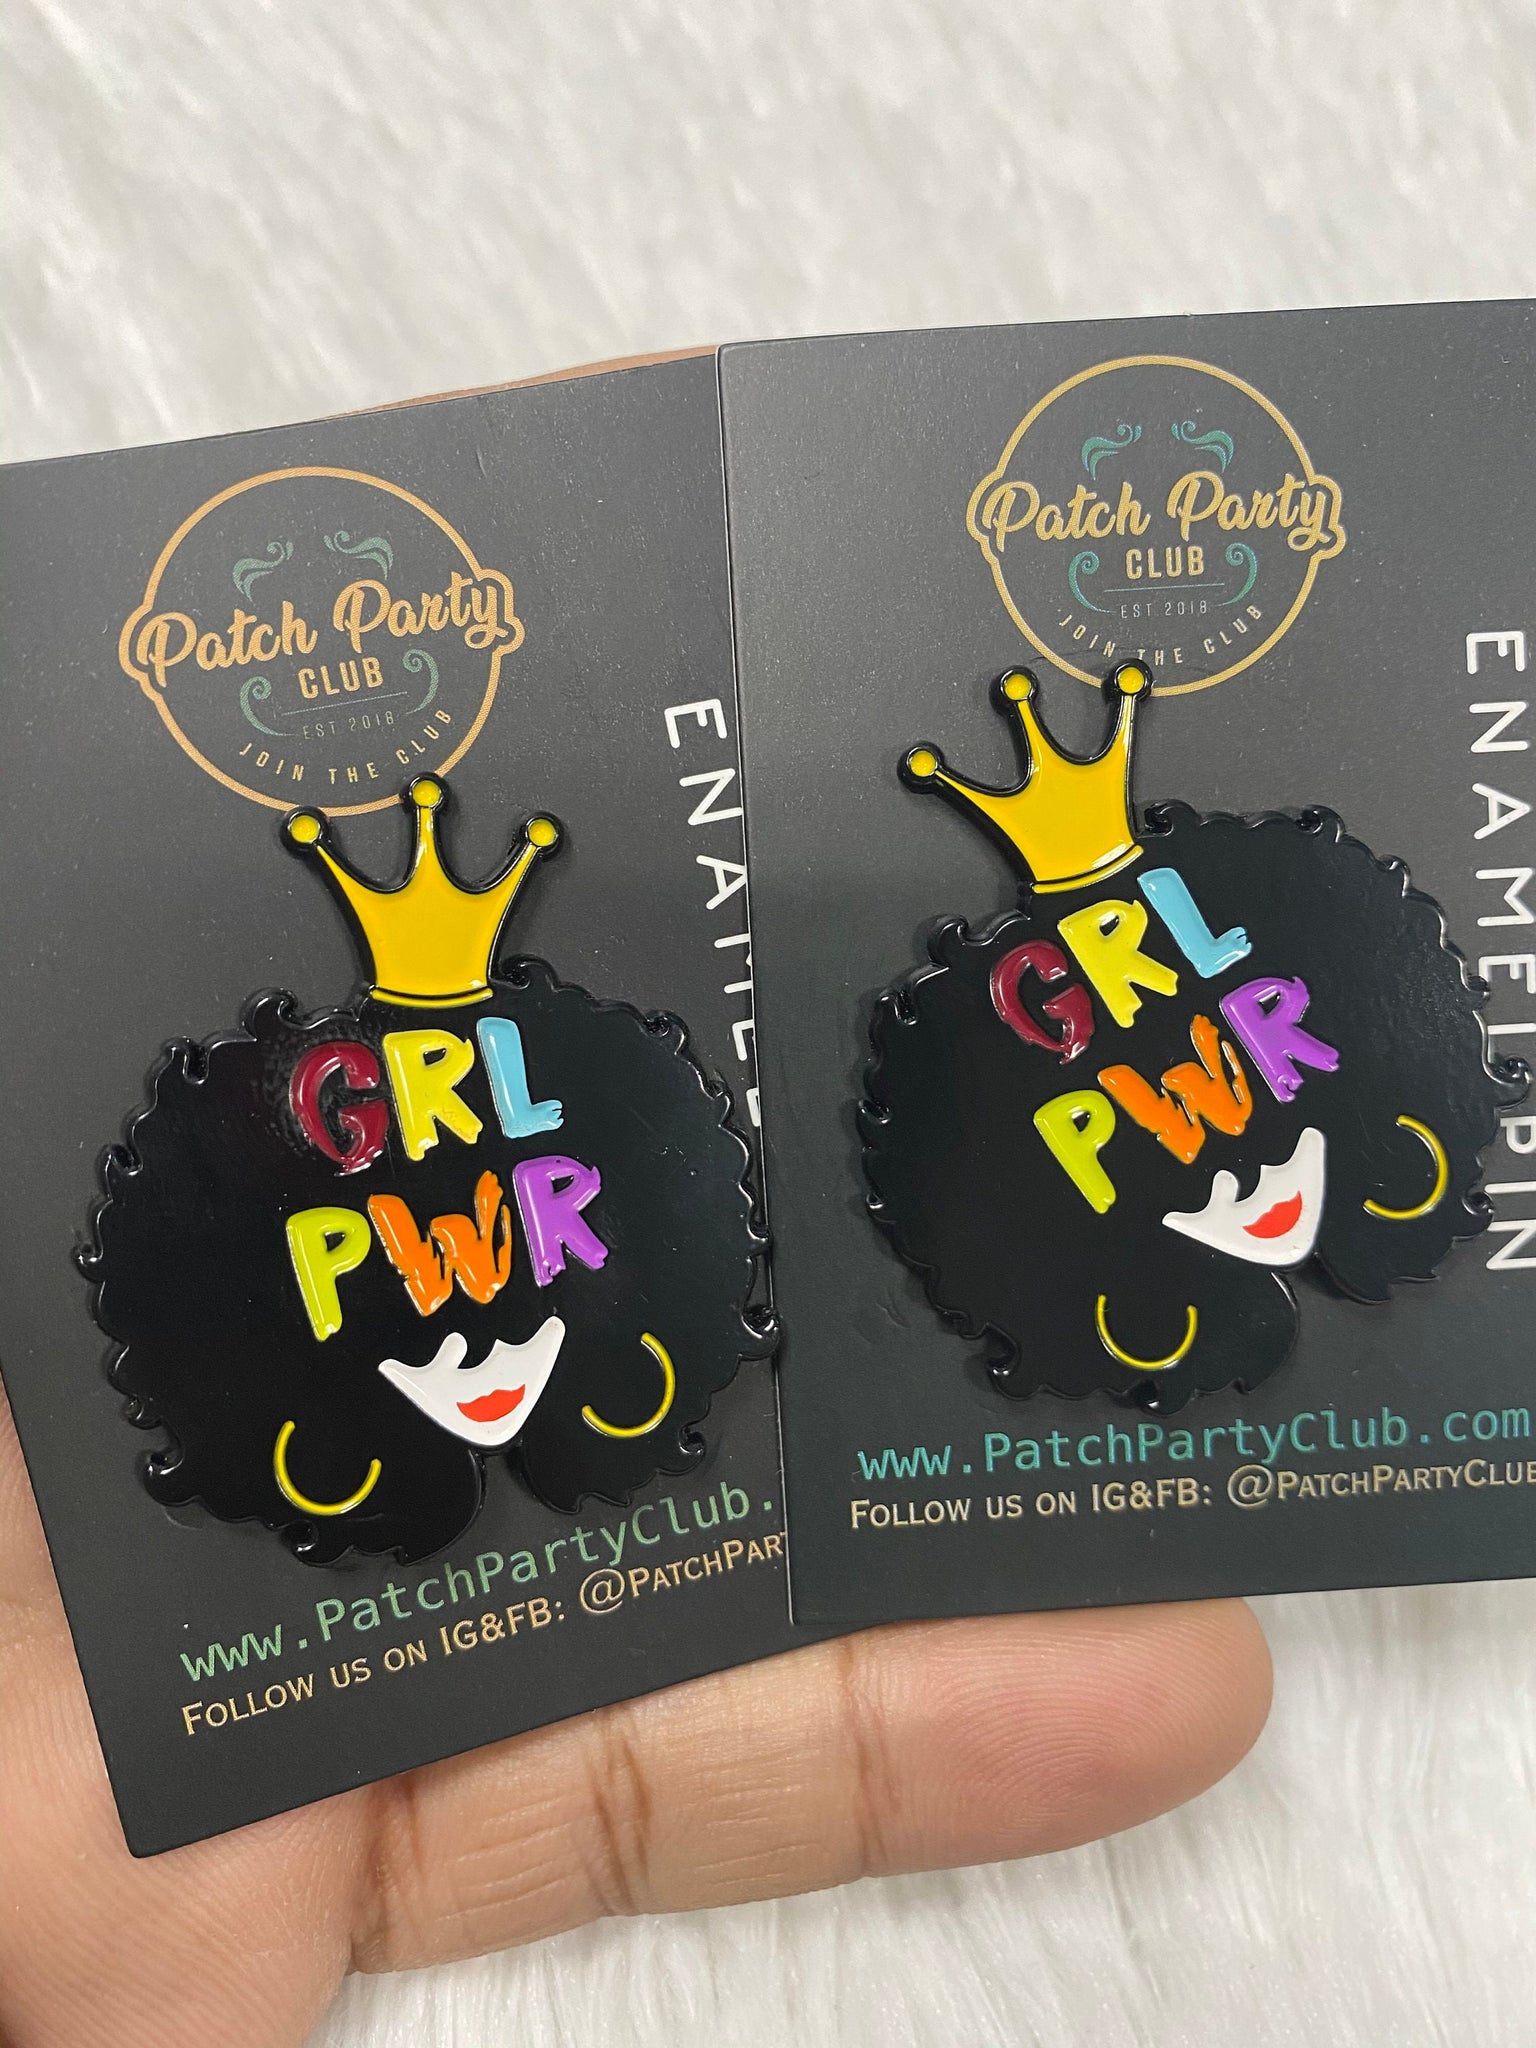 NEW, Pin Feminist, Enamel Pin "GRL POWER " Exclusive Lapel Pin, Grl Power Pin, Size 1.50 inches, with Butterfly Clutches